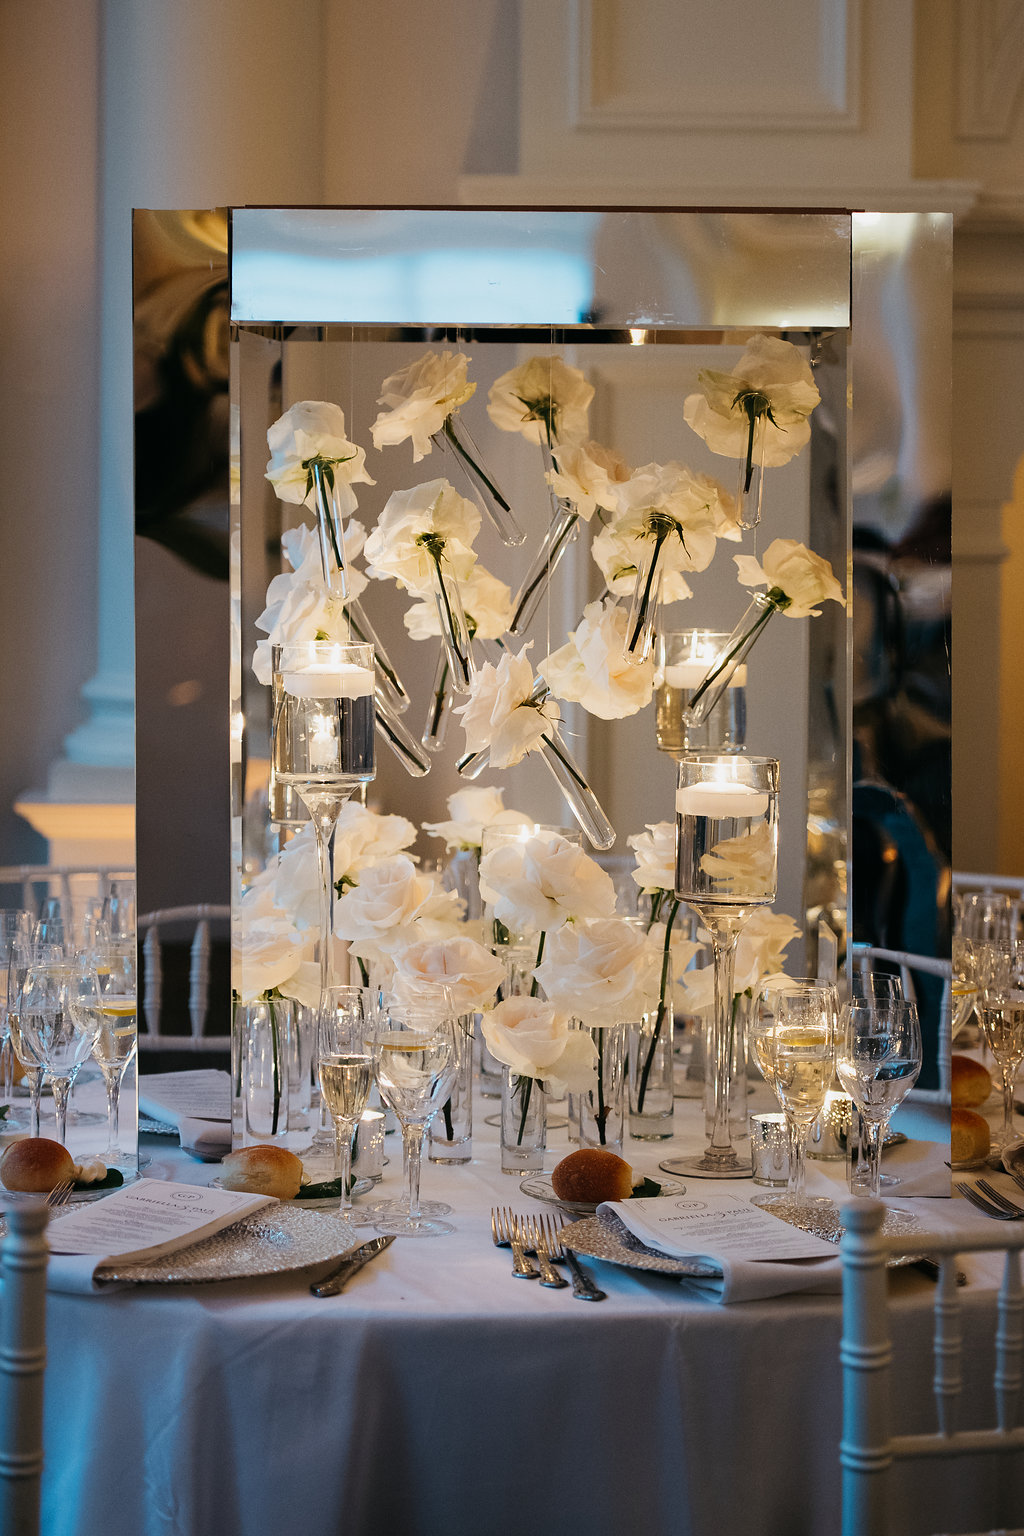 suspended white flowers in centerpiece at wedding